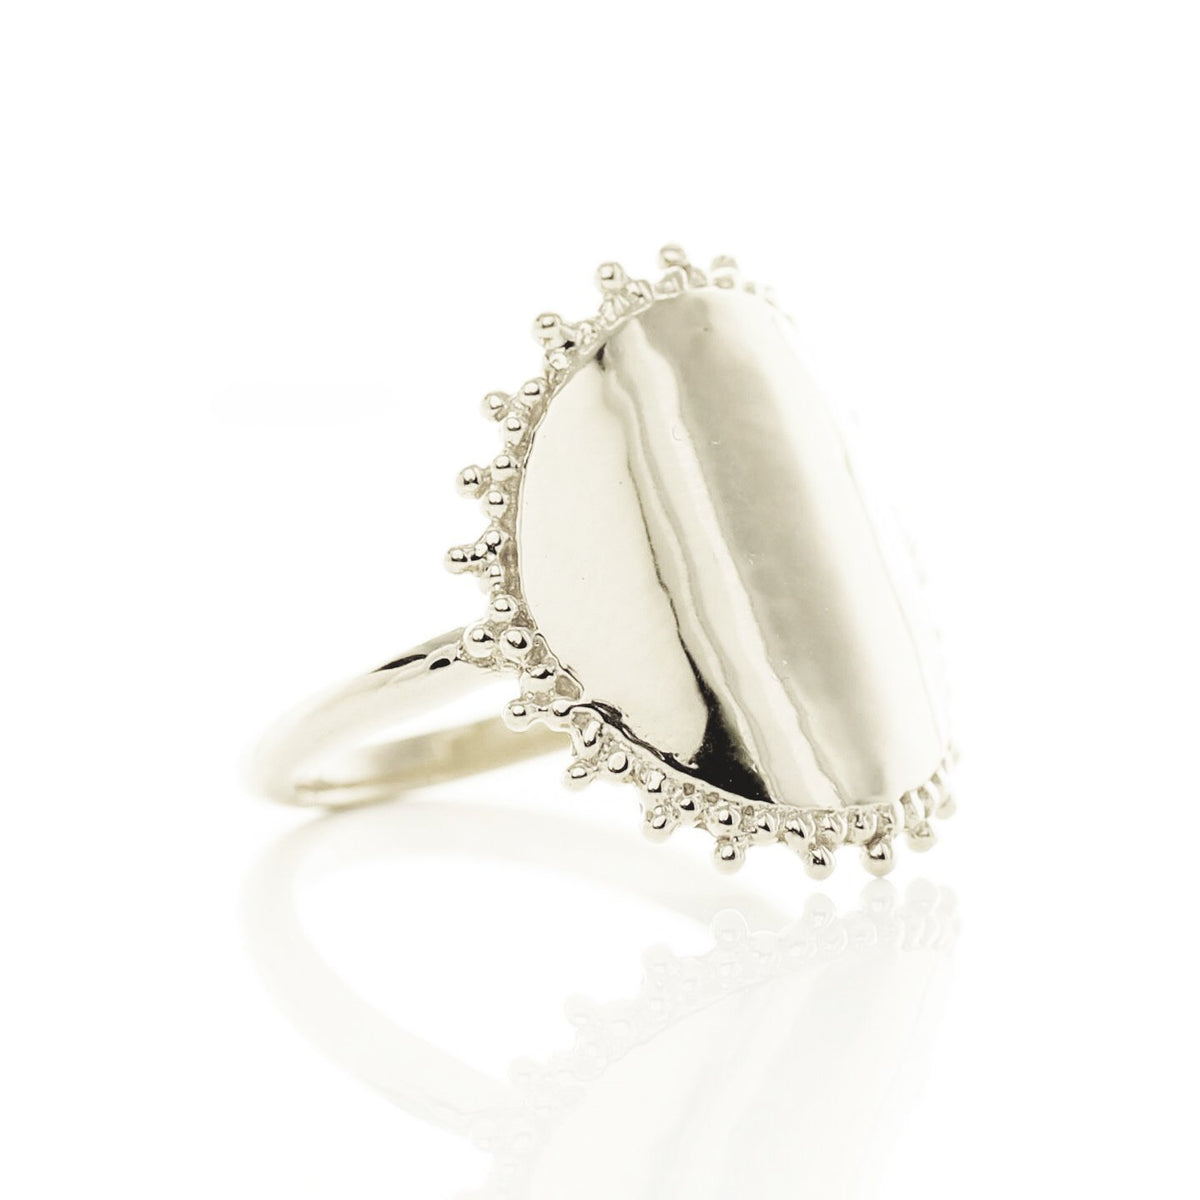 BELIEVE SOLEIL RING - SILVER - SO PRETTY CARA COTTER